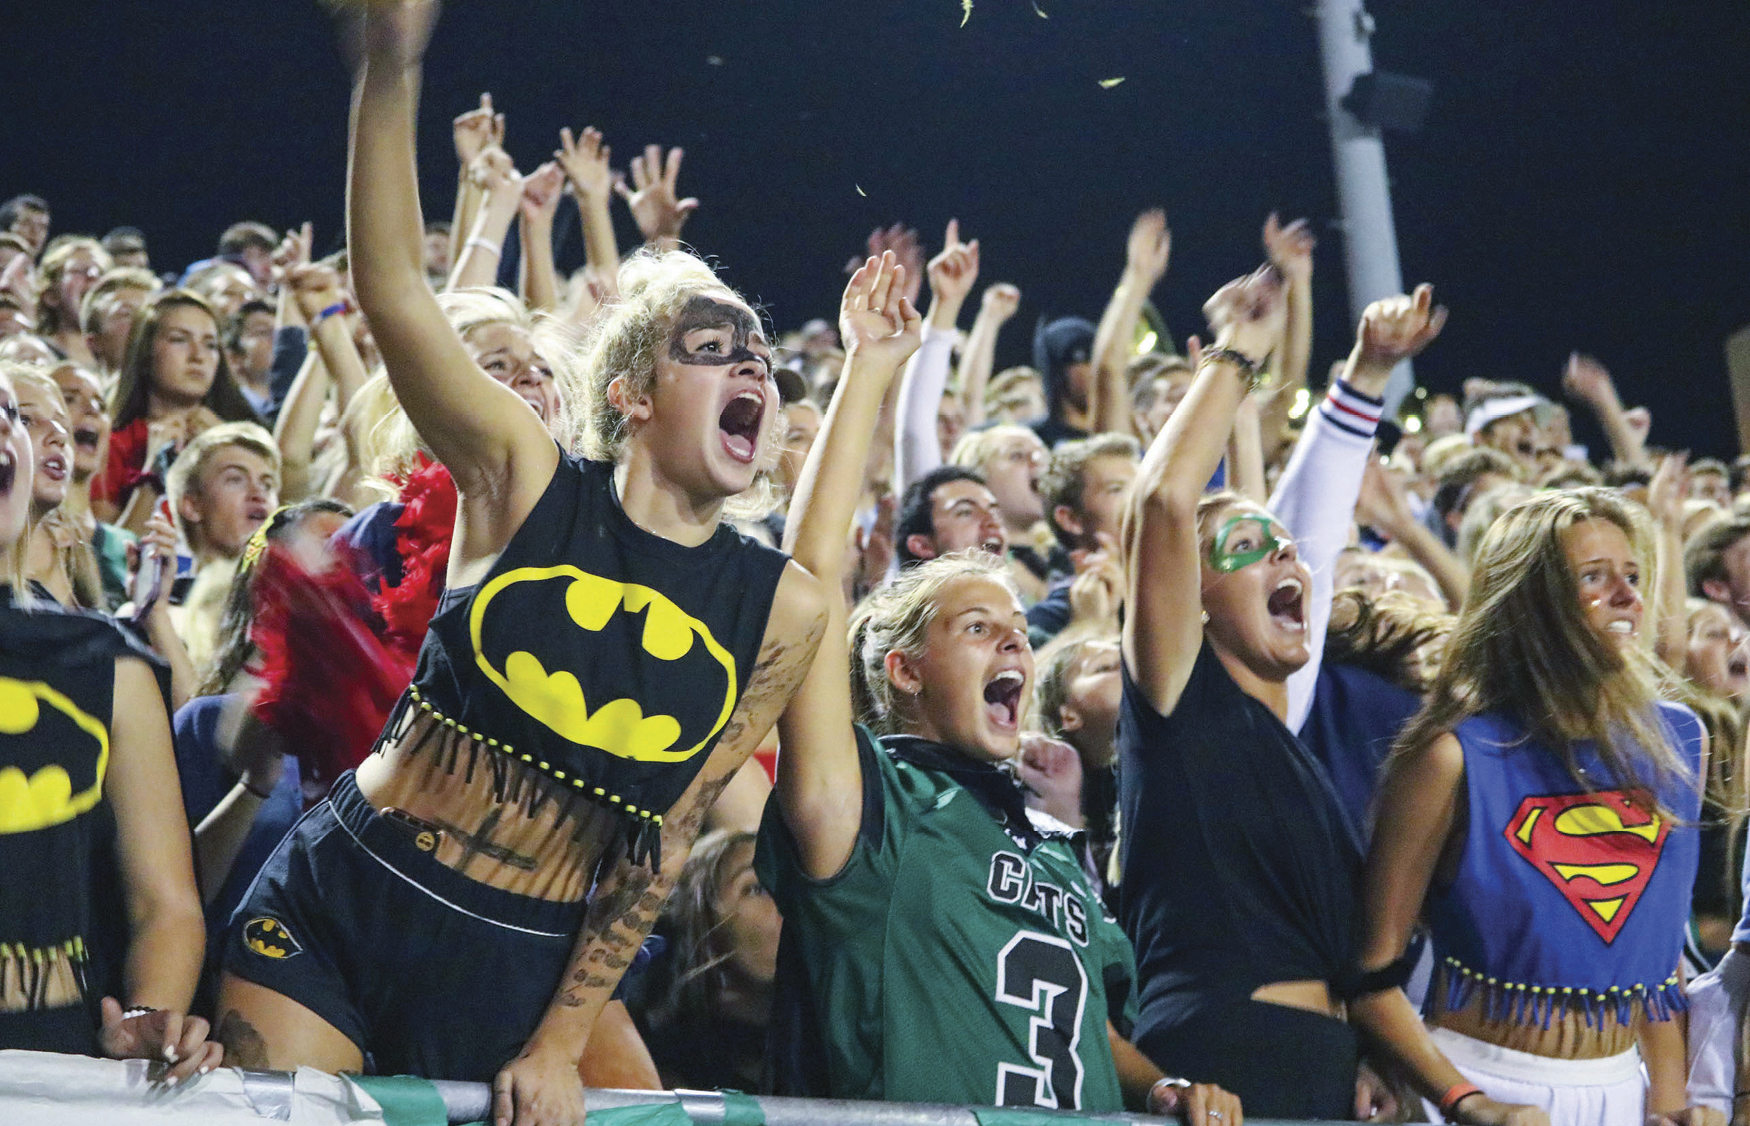 fans dressed up as superheroes and cheering